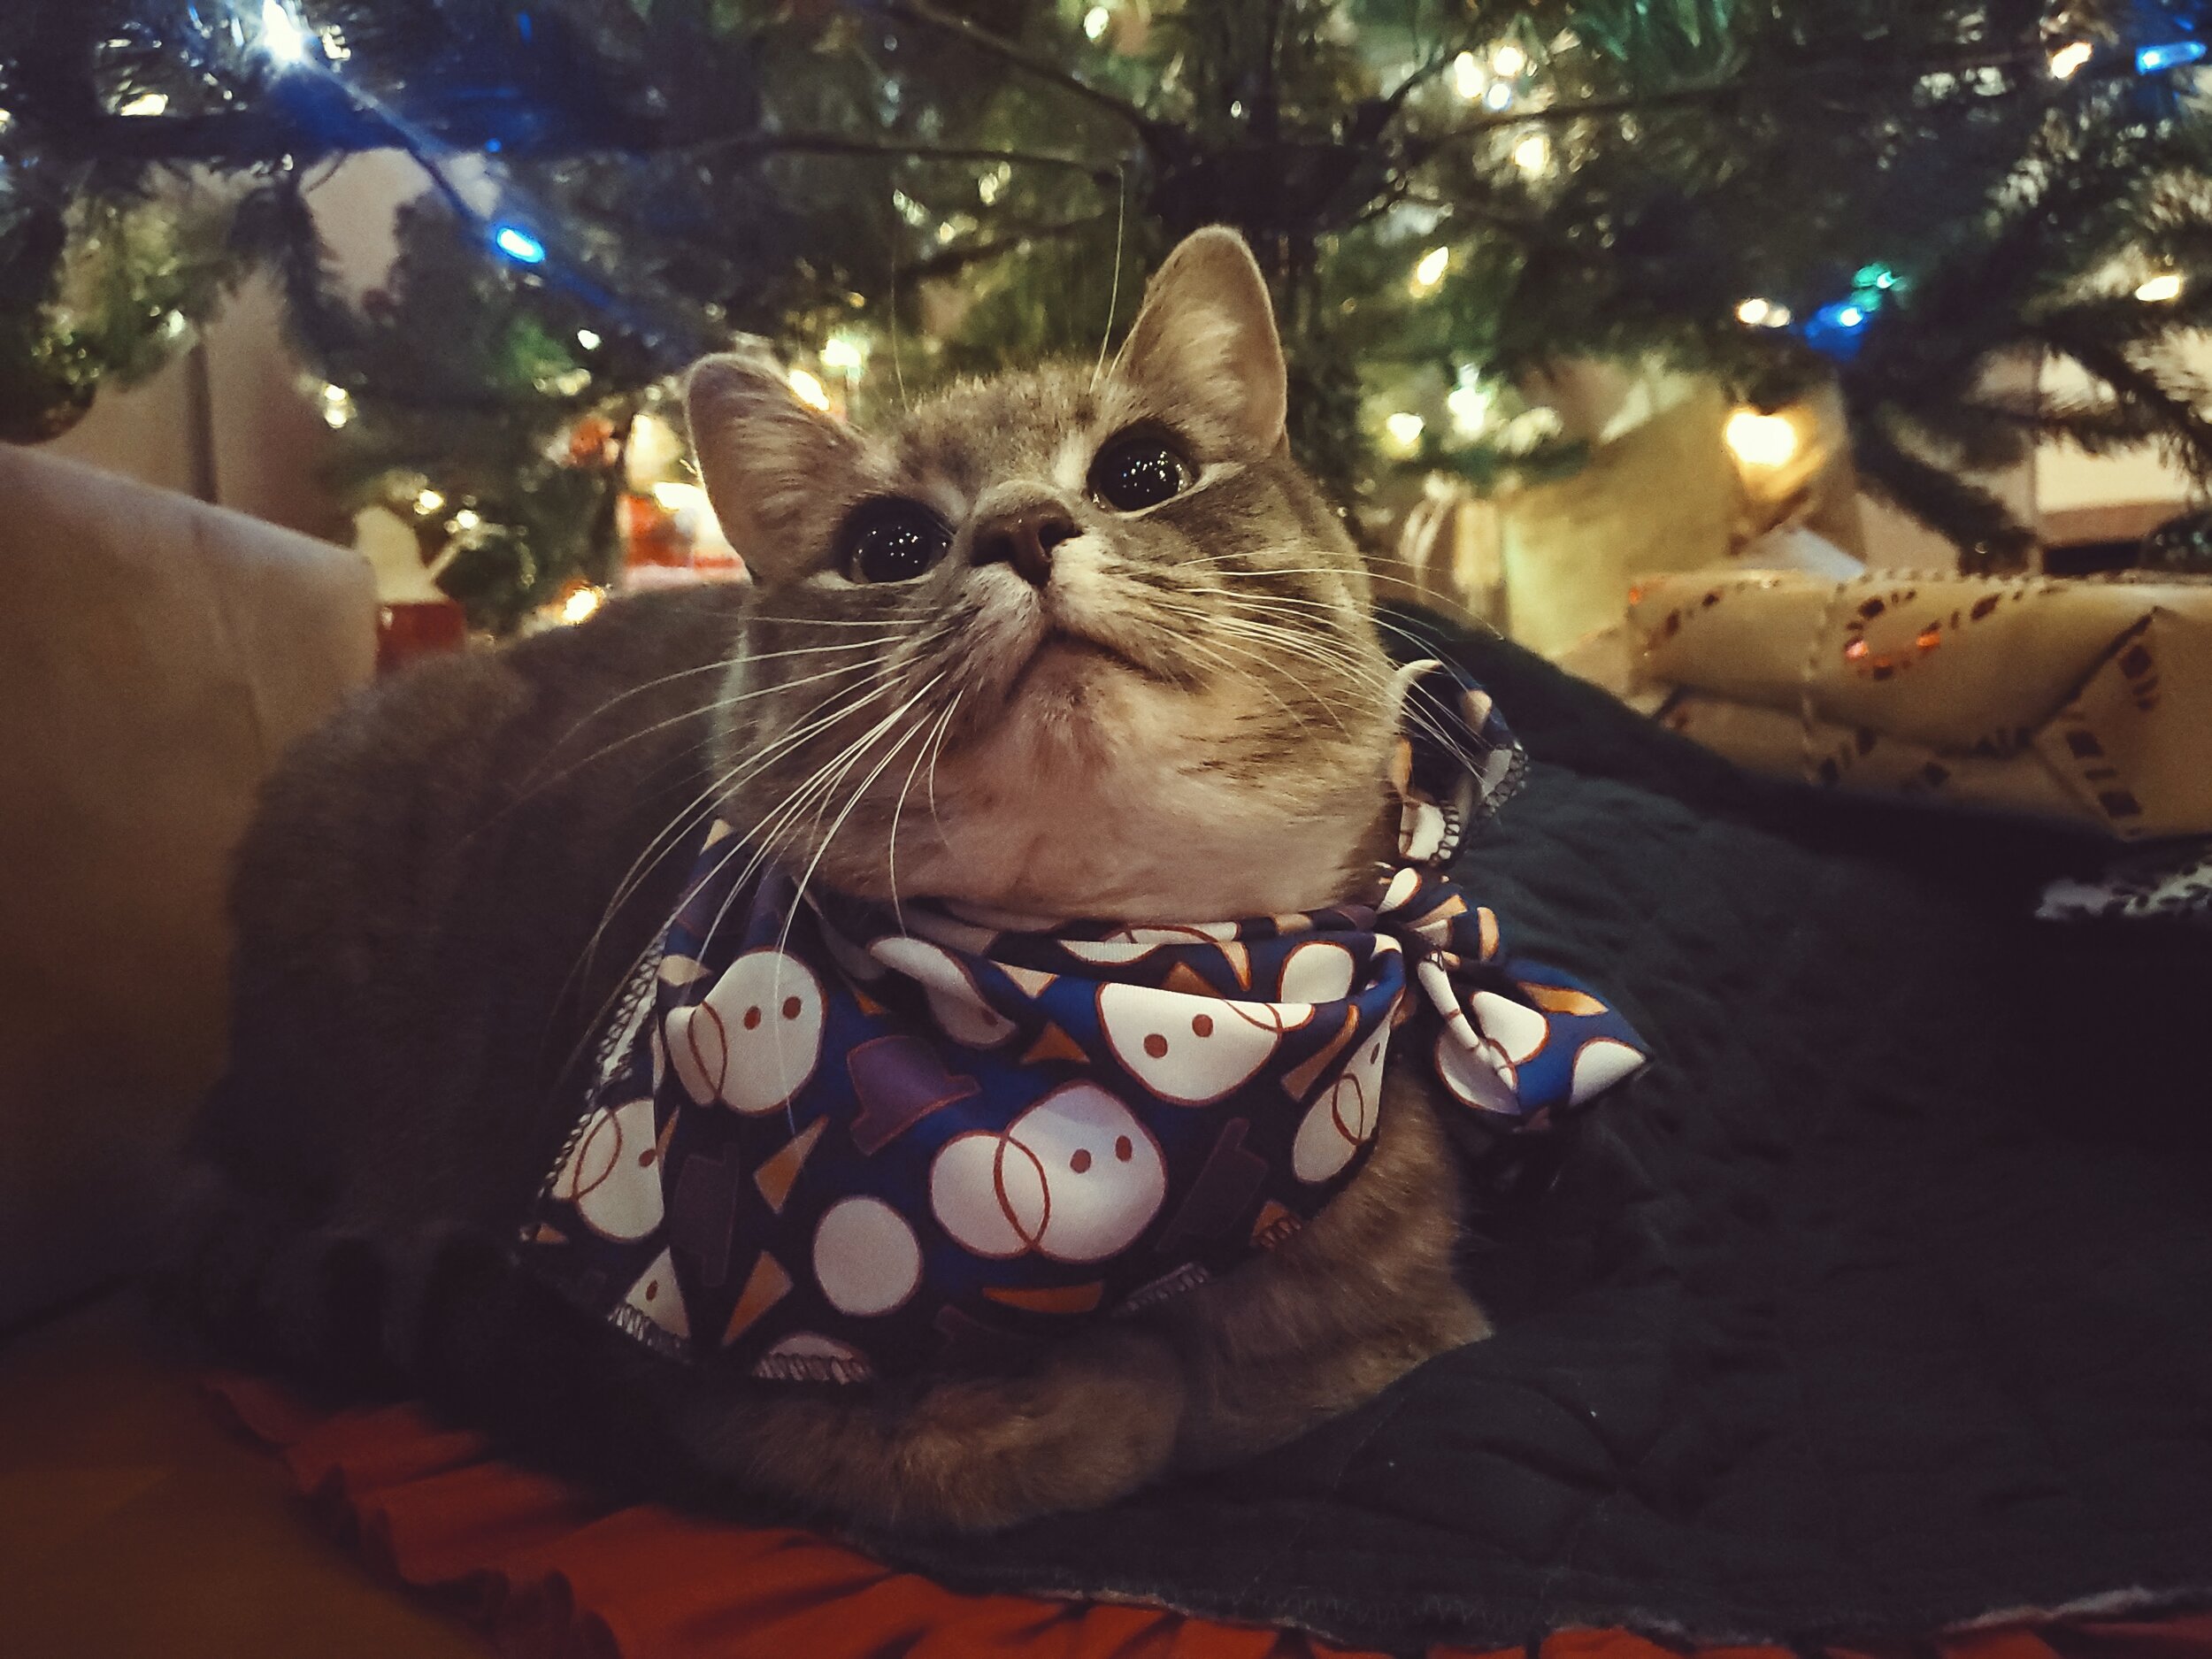  We decided to enter a cat photo contest through out vets and Navi did a great job at posing! I hope we win! Look how festive she is! 